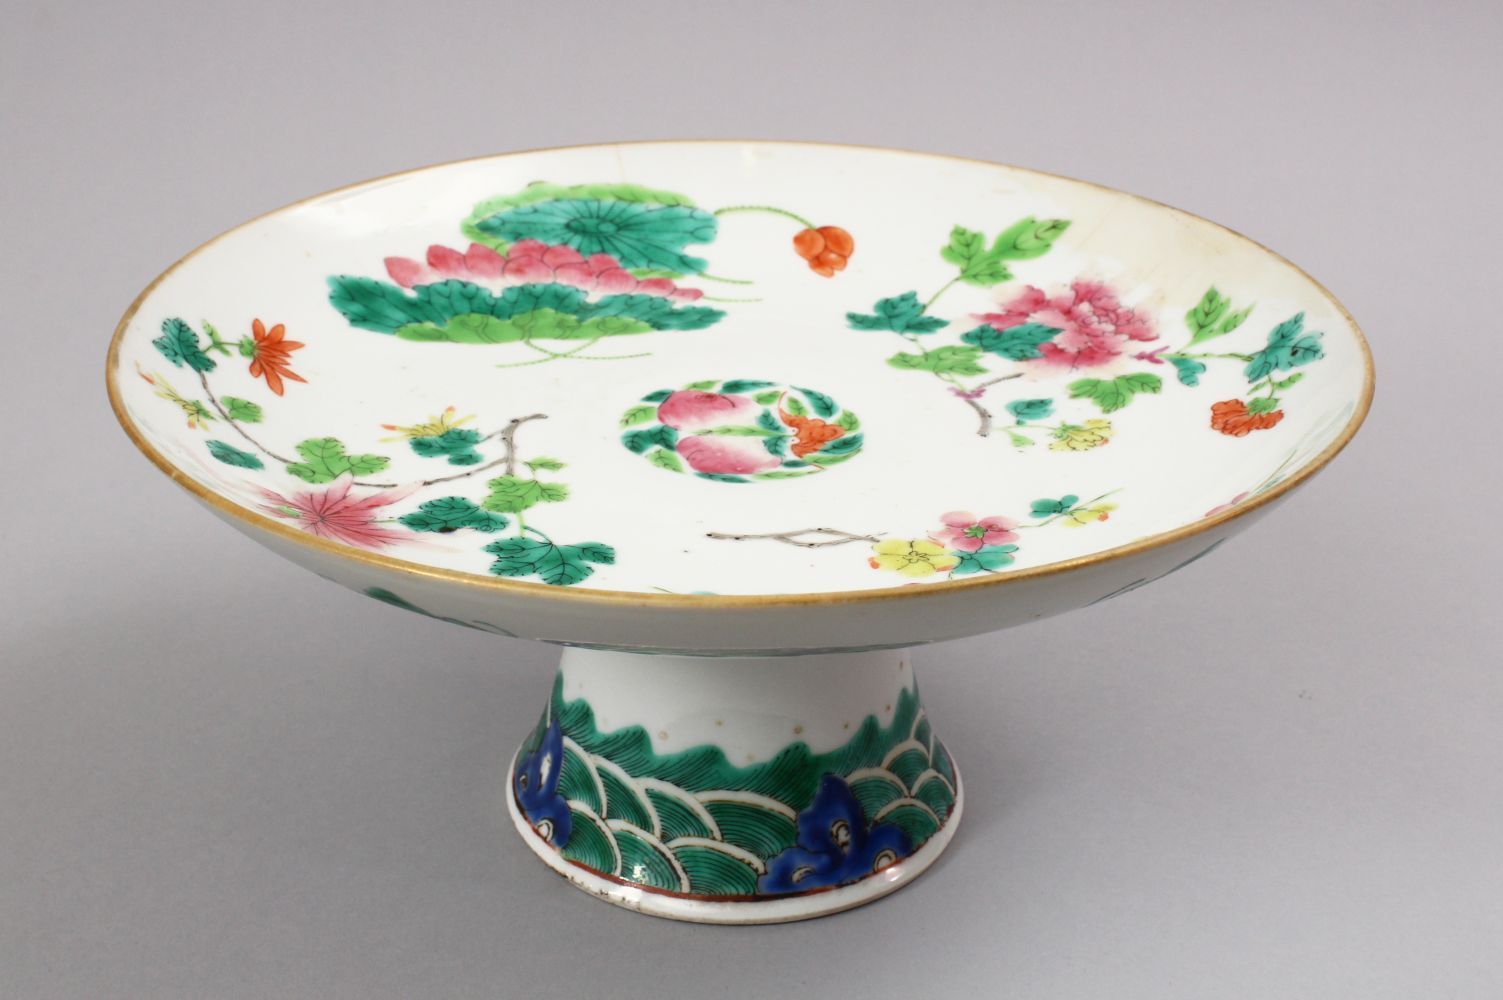 A 19TH CENTURY CHINESE FAMILLE ROSE PORCELAIN STEM DISH, decorated with native array of flora with a